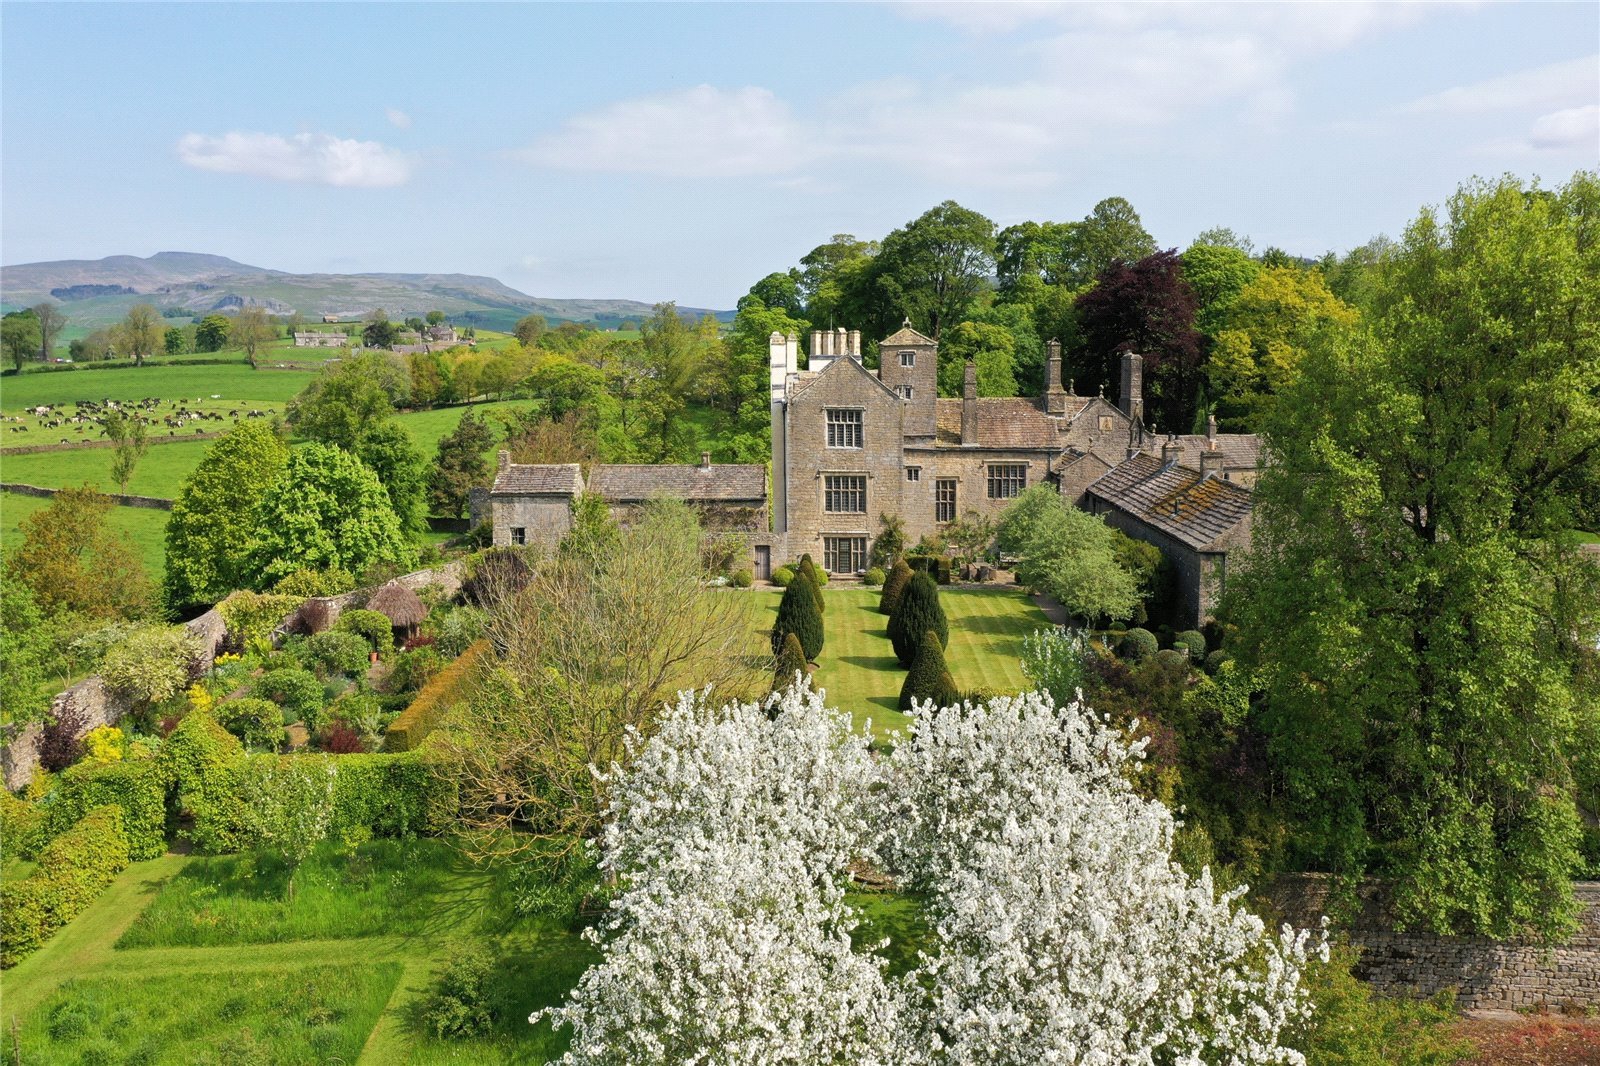 Francis York English Country Estate on the Edge of the Yorkshire Dales 00003.jpg